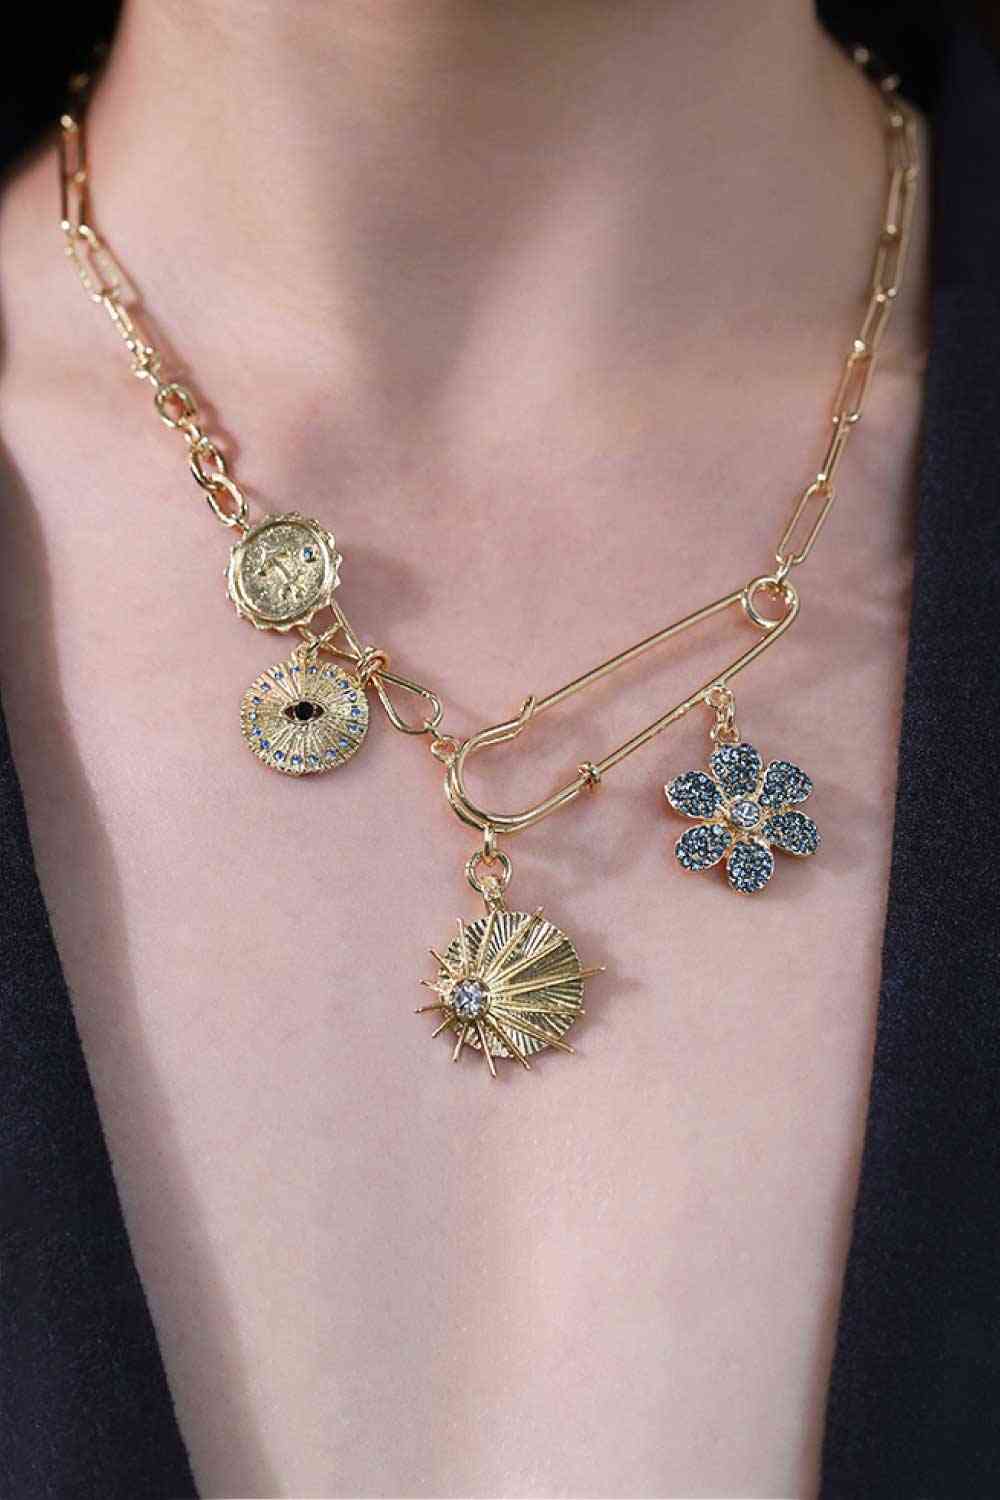 5-Piece Wholesale Rhinestone Flower Paperclip Chain Necklace